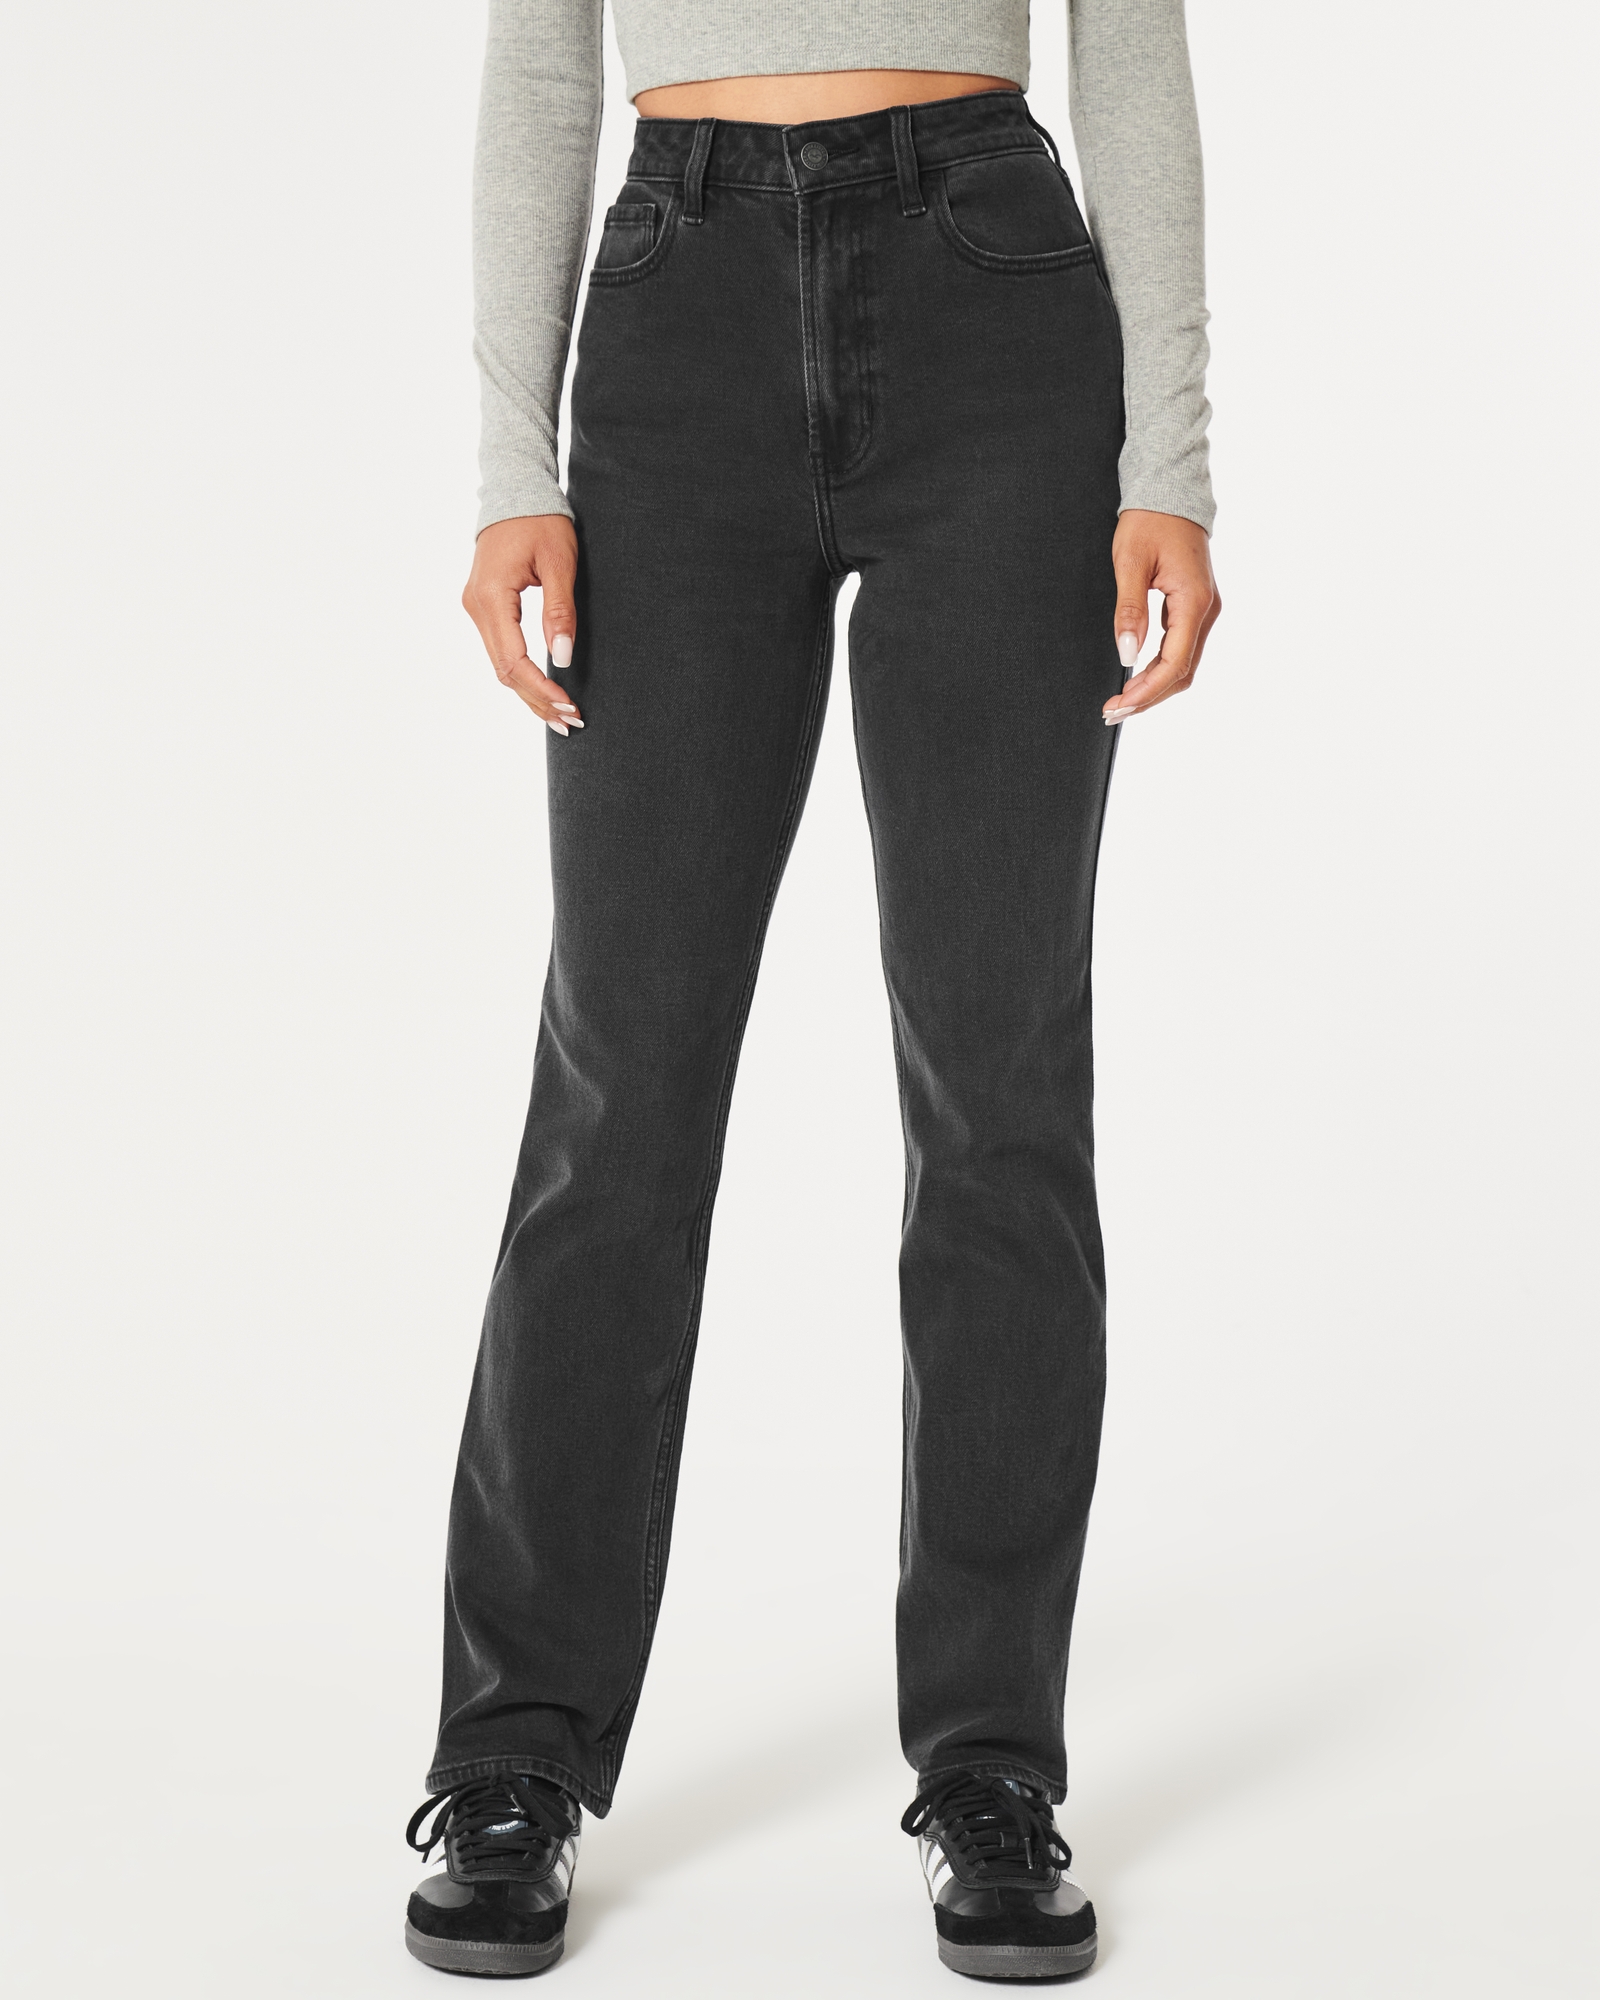 Hollister Ultra Rise Straight Leg Black Leather Pants Size 31 - $17 (71%  Off Retail) - From Julia